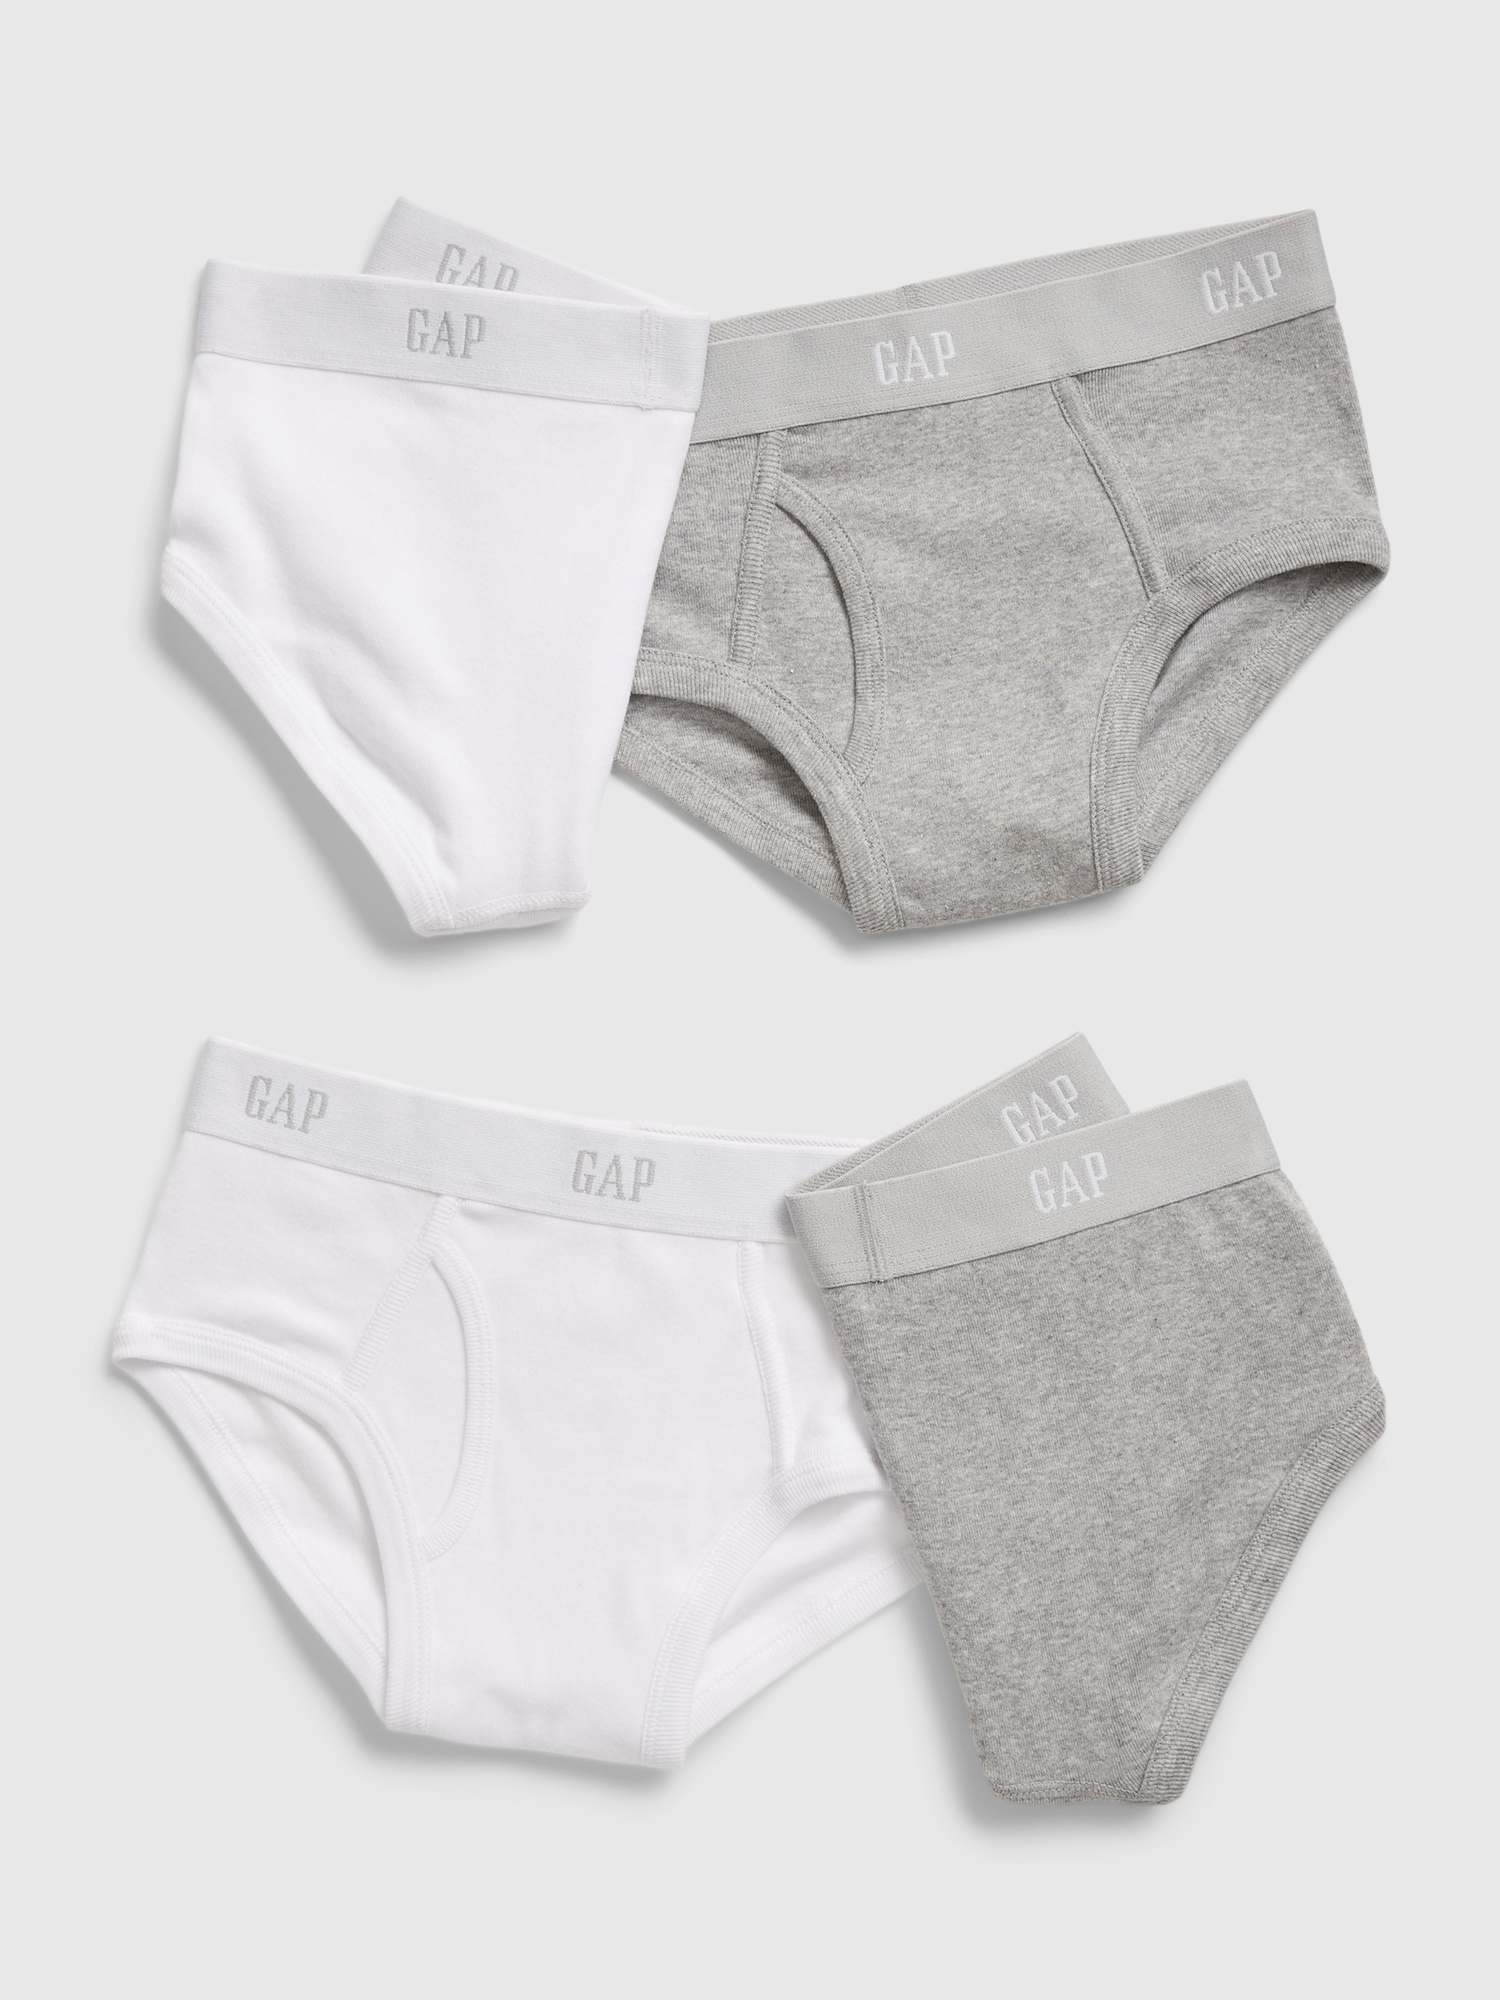 Buy Gap Boxers 3-Pack from the Gap online shop